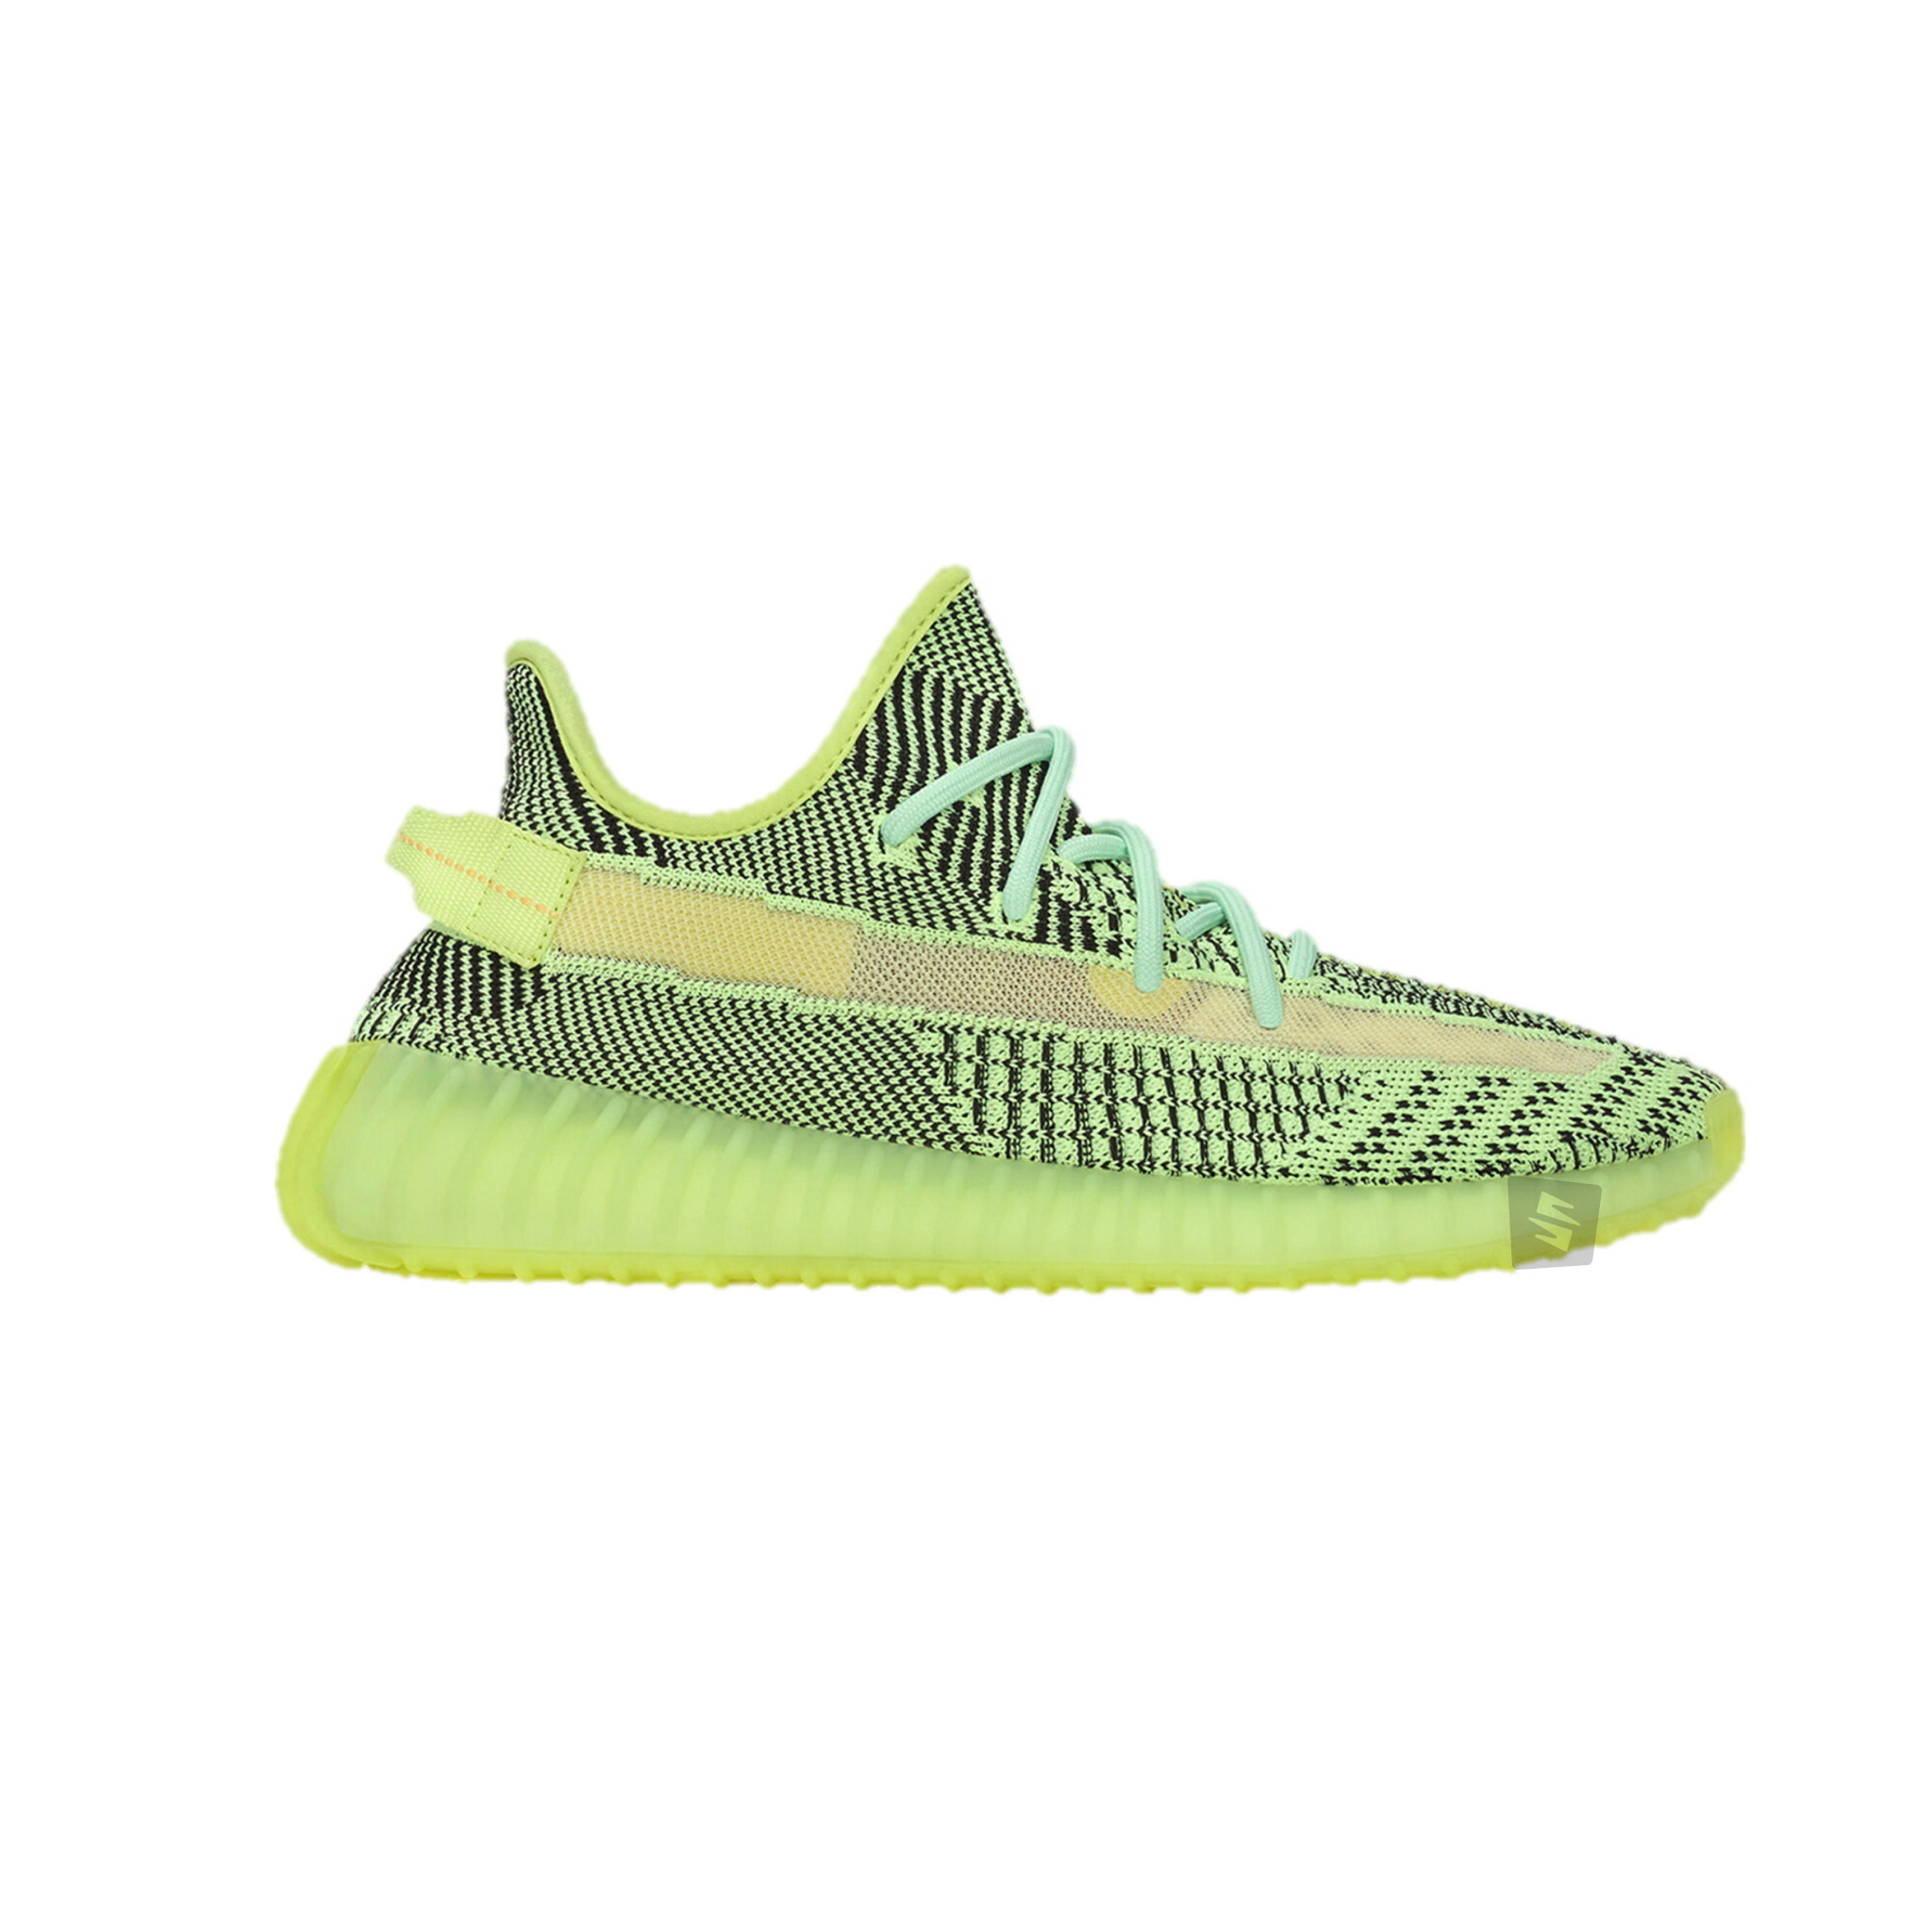 yeezy boots 350 v2